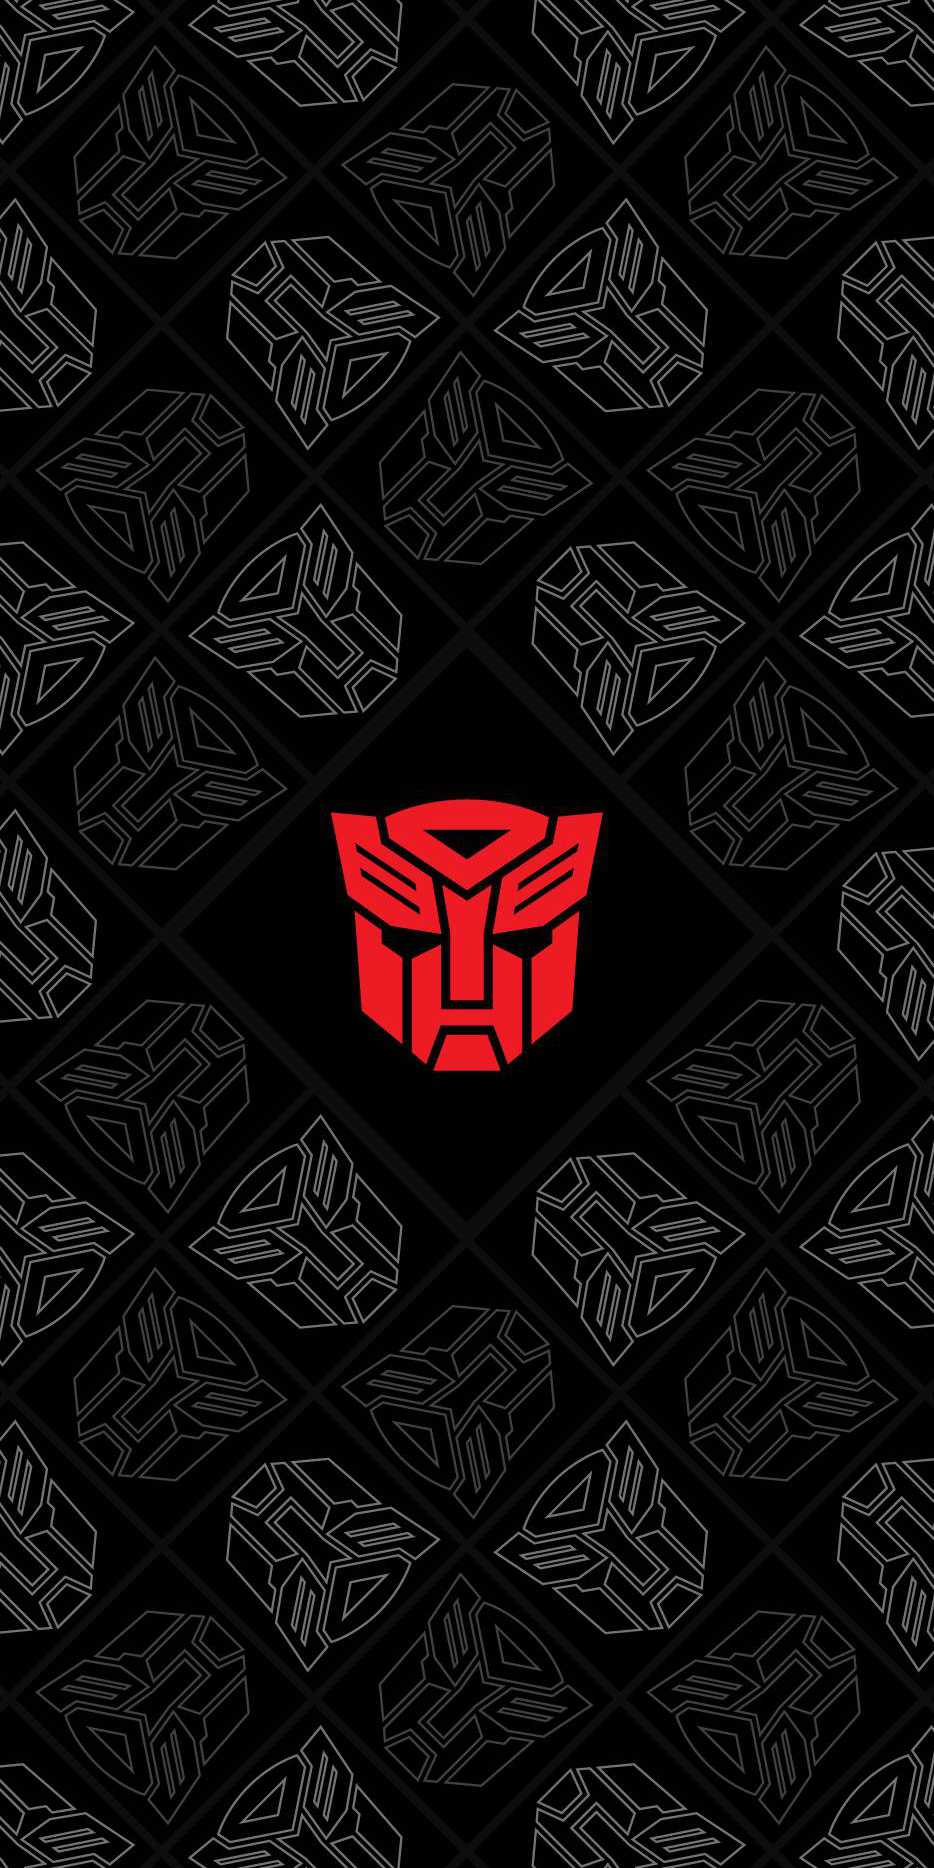 Transformers Autobots Logo IPhone Wallpaper   IPhone Wallpapers 934x1868